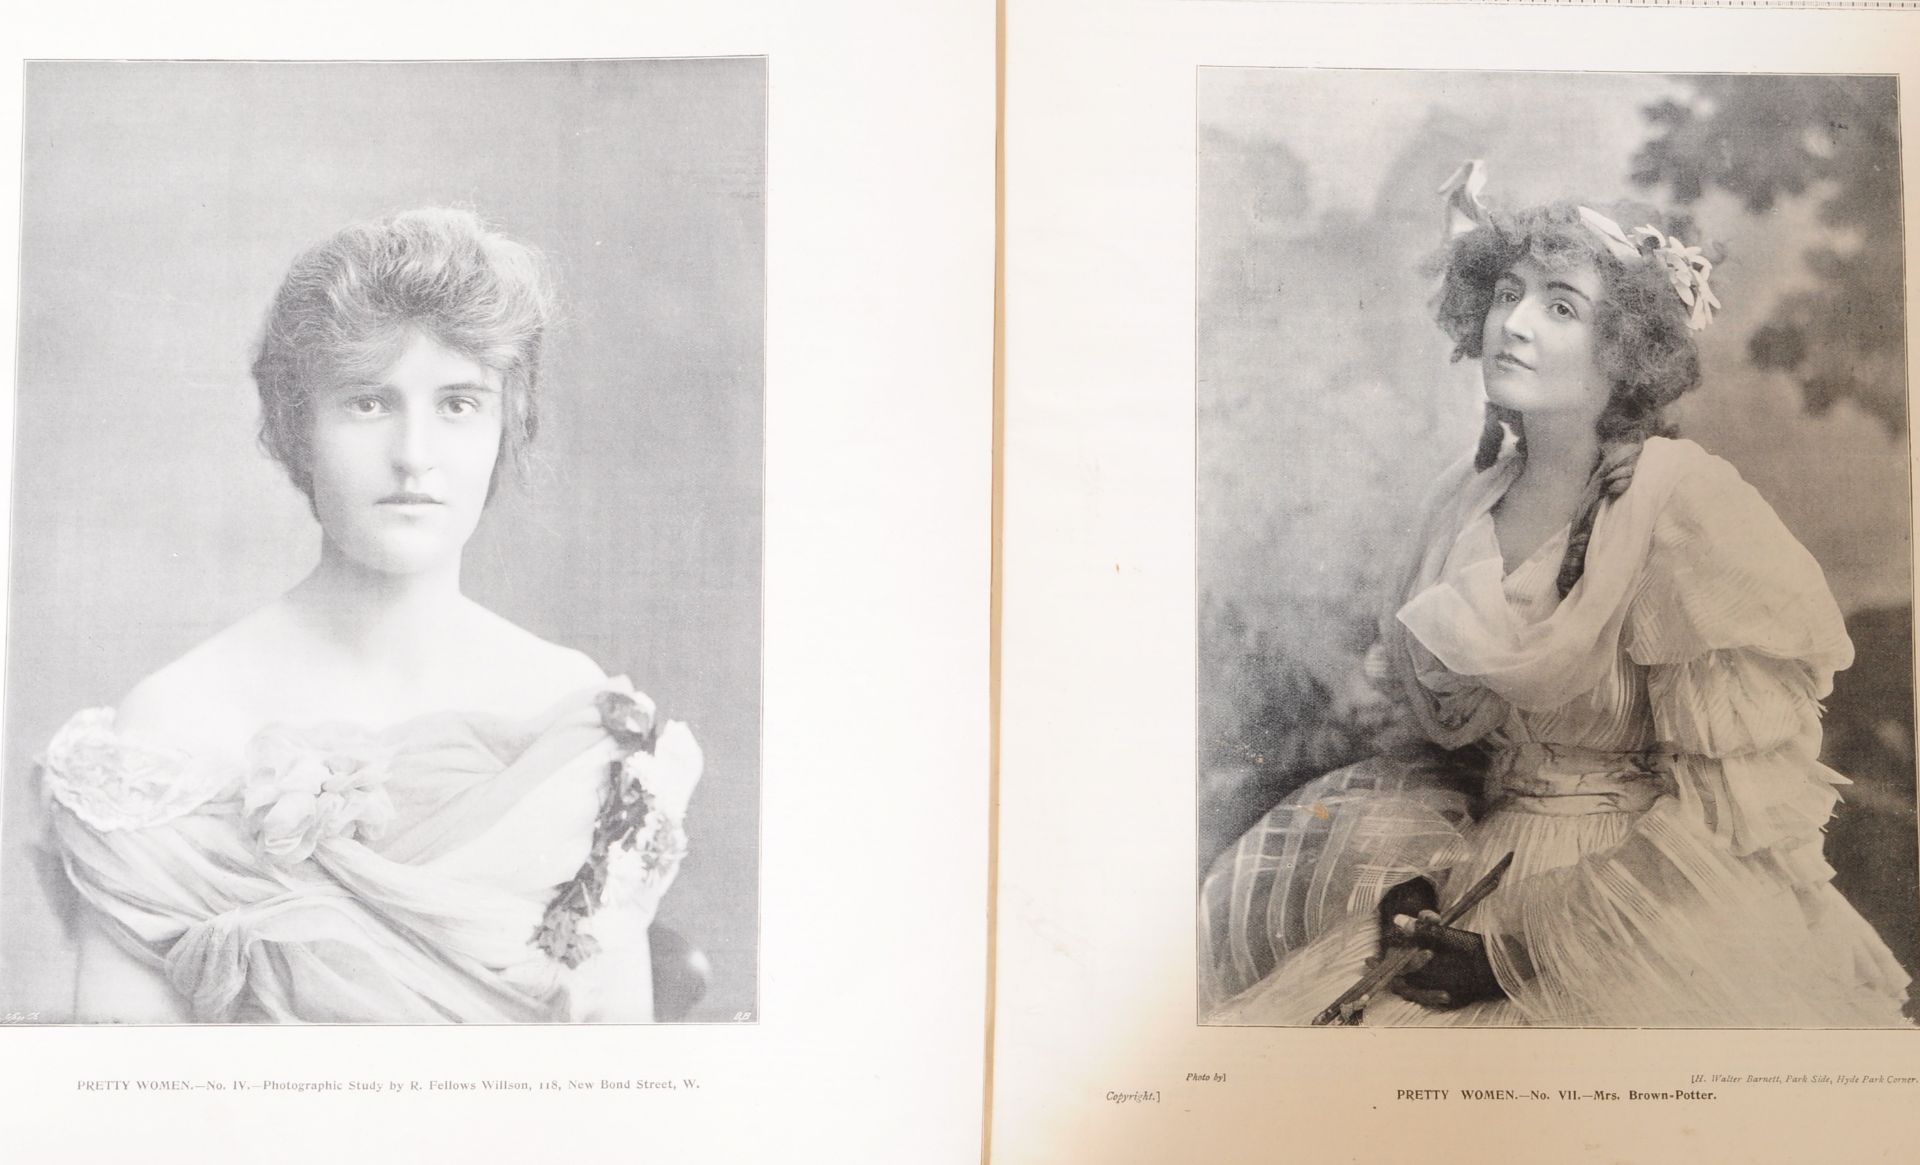 THE GENTLEWOMAN WEEKLY JOURNALS FROM THE 1890'S - Image 7 of 7